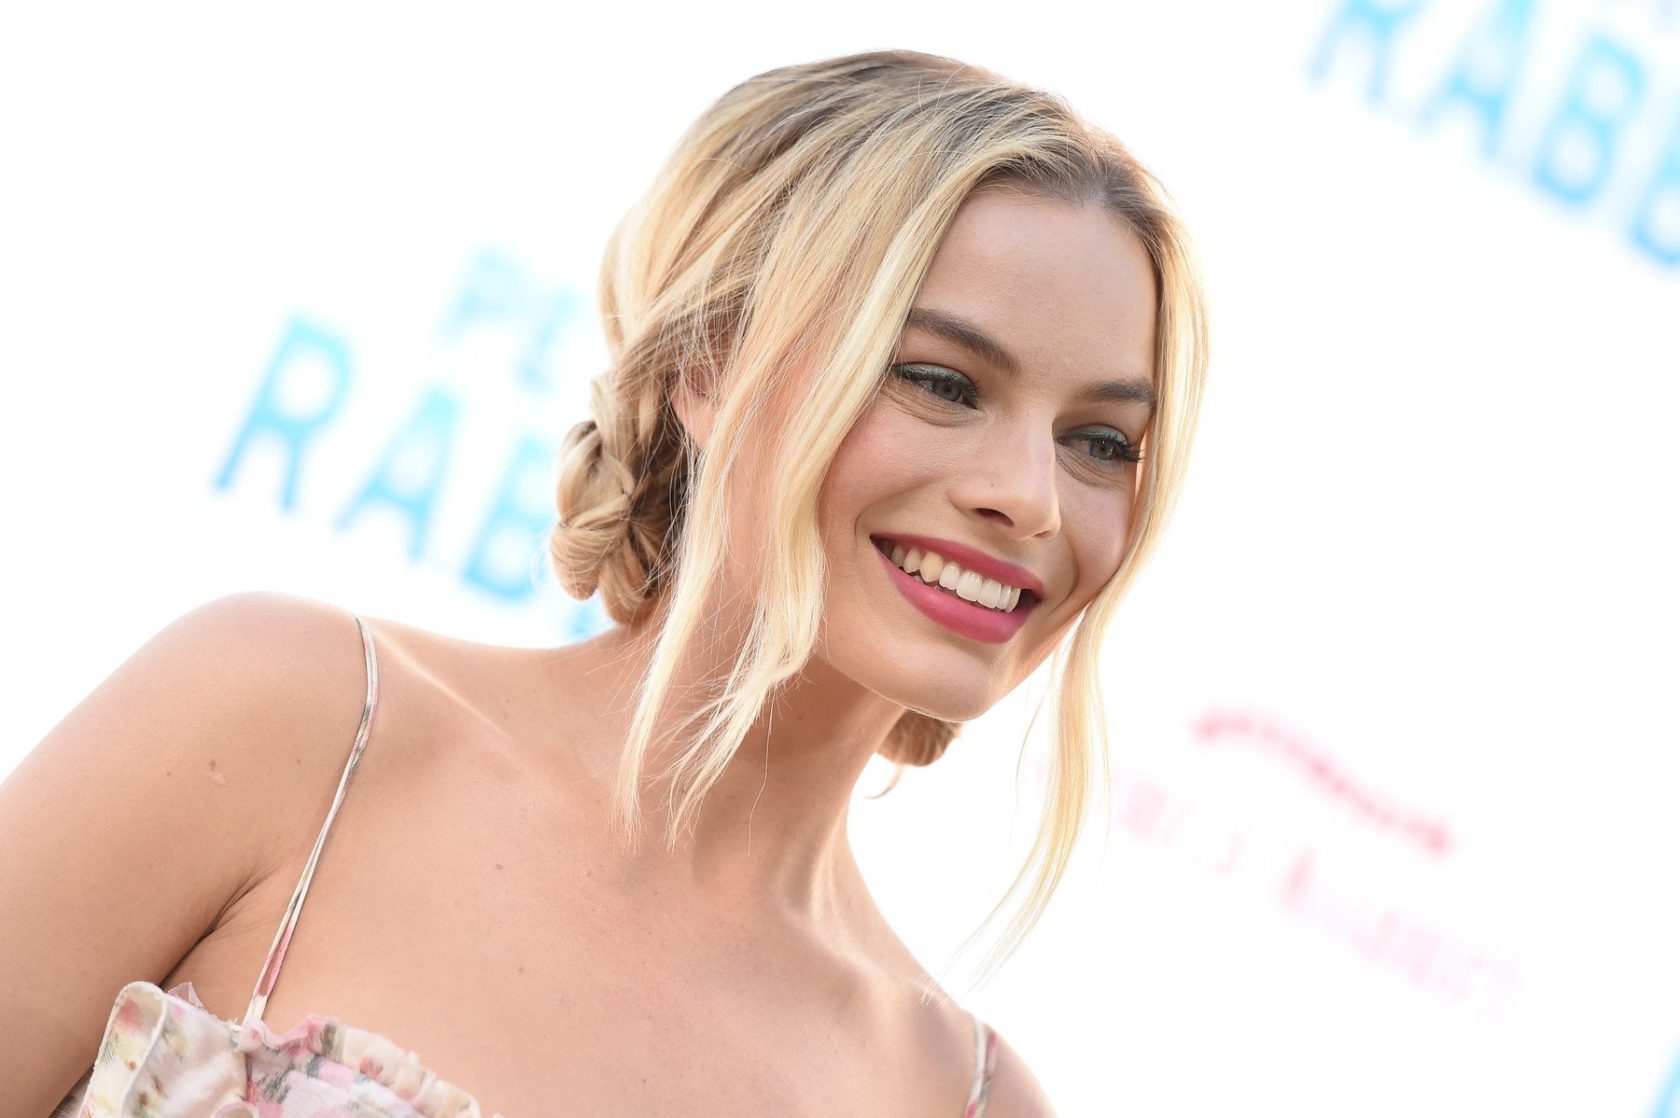 World Premiere of "Peter Rabbit". The Grove, Los Angeles, CA. Pictured: Margot Robbie. EVENT February 03, 2018 Job: 180203A1, Image: 362234292, License: Rights-managed, Restrictions: 000, Model Release: no, Credit line: Profimedia, Bauer Griffin